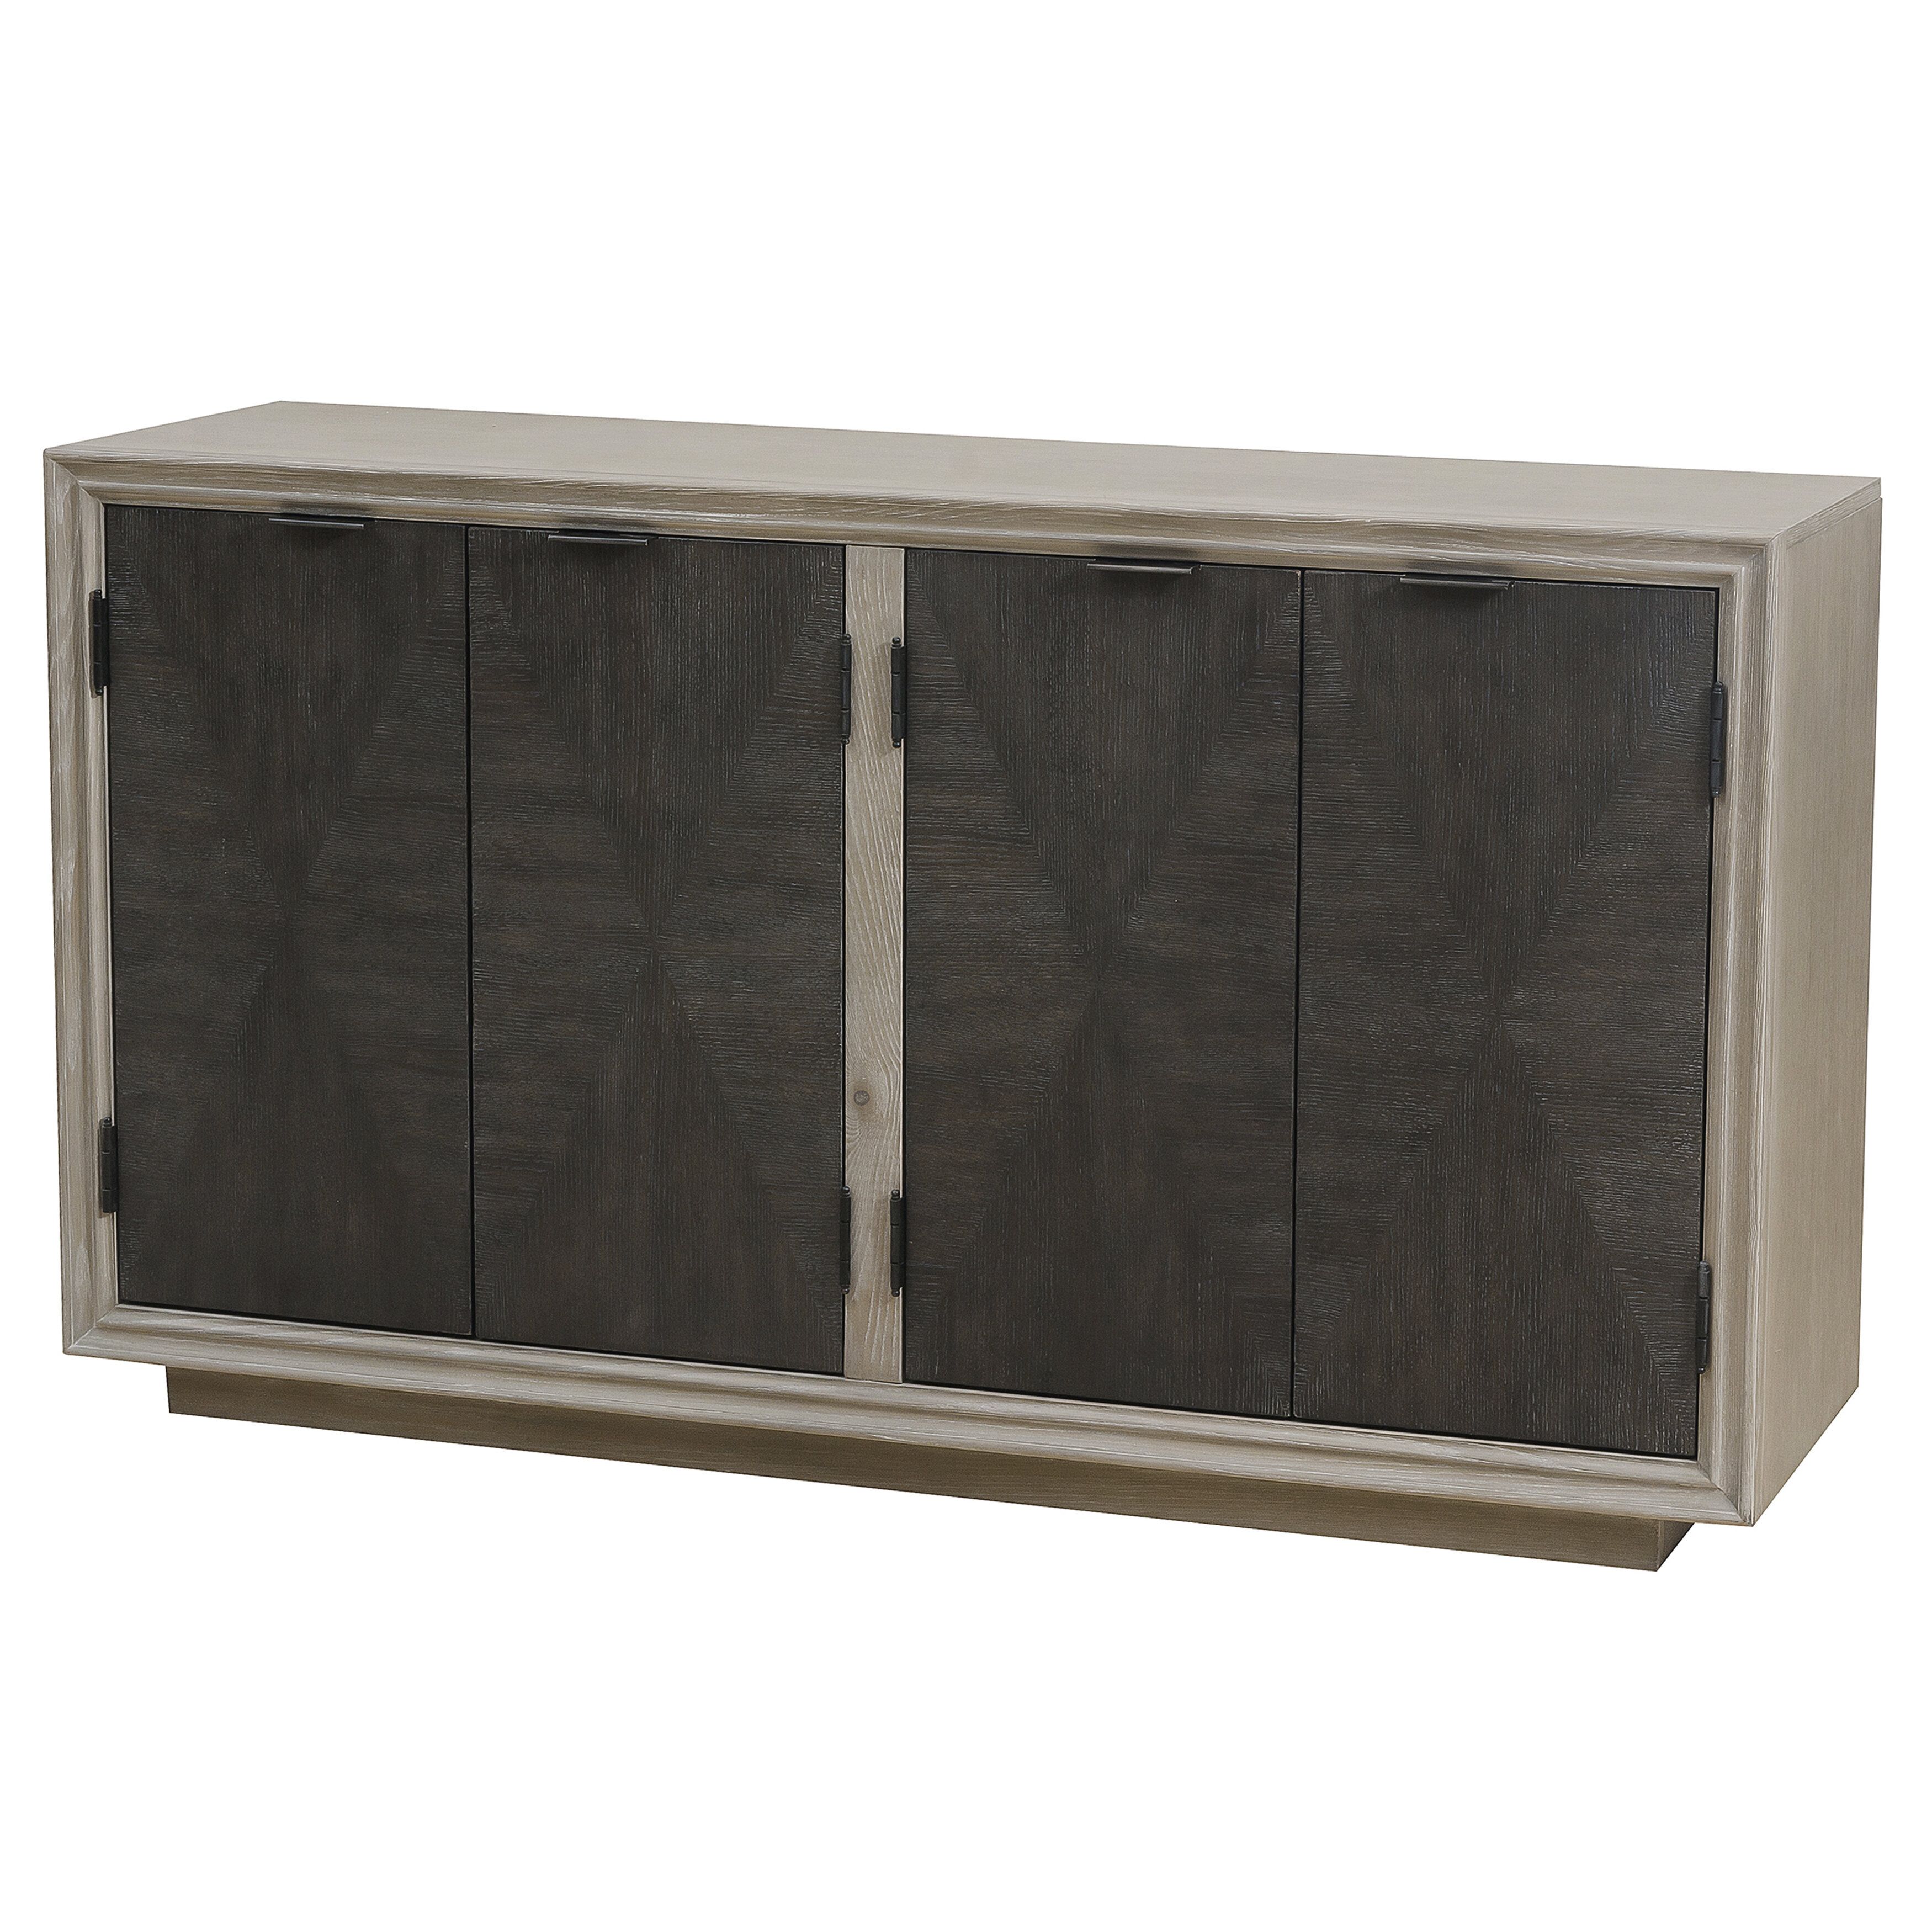 Hoover Four Door Duotone Parquet Sideboard Within Most Popular Massillon Sideboards (View 15 of 20)